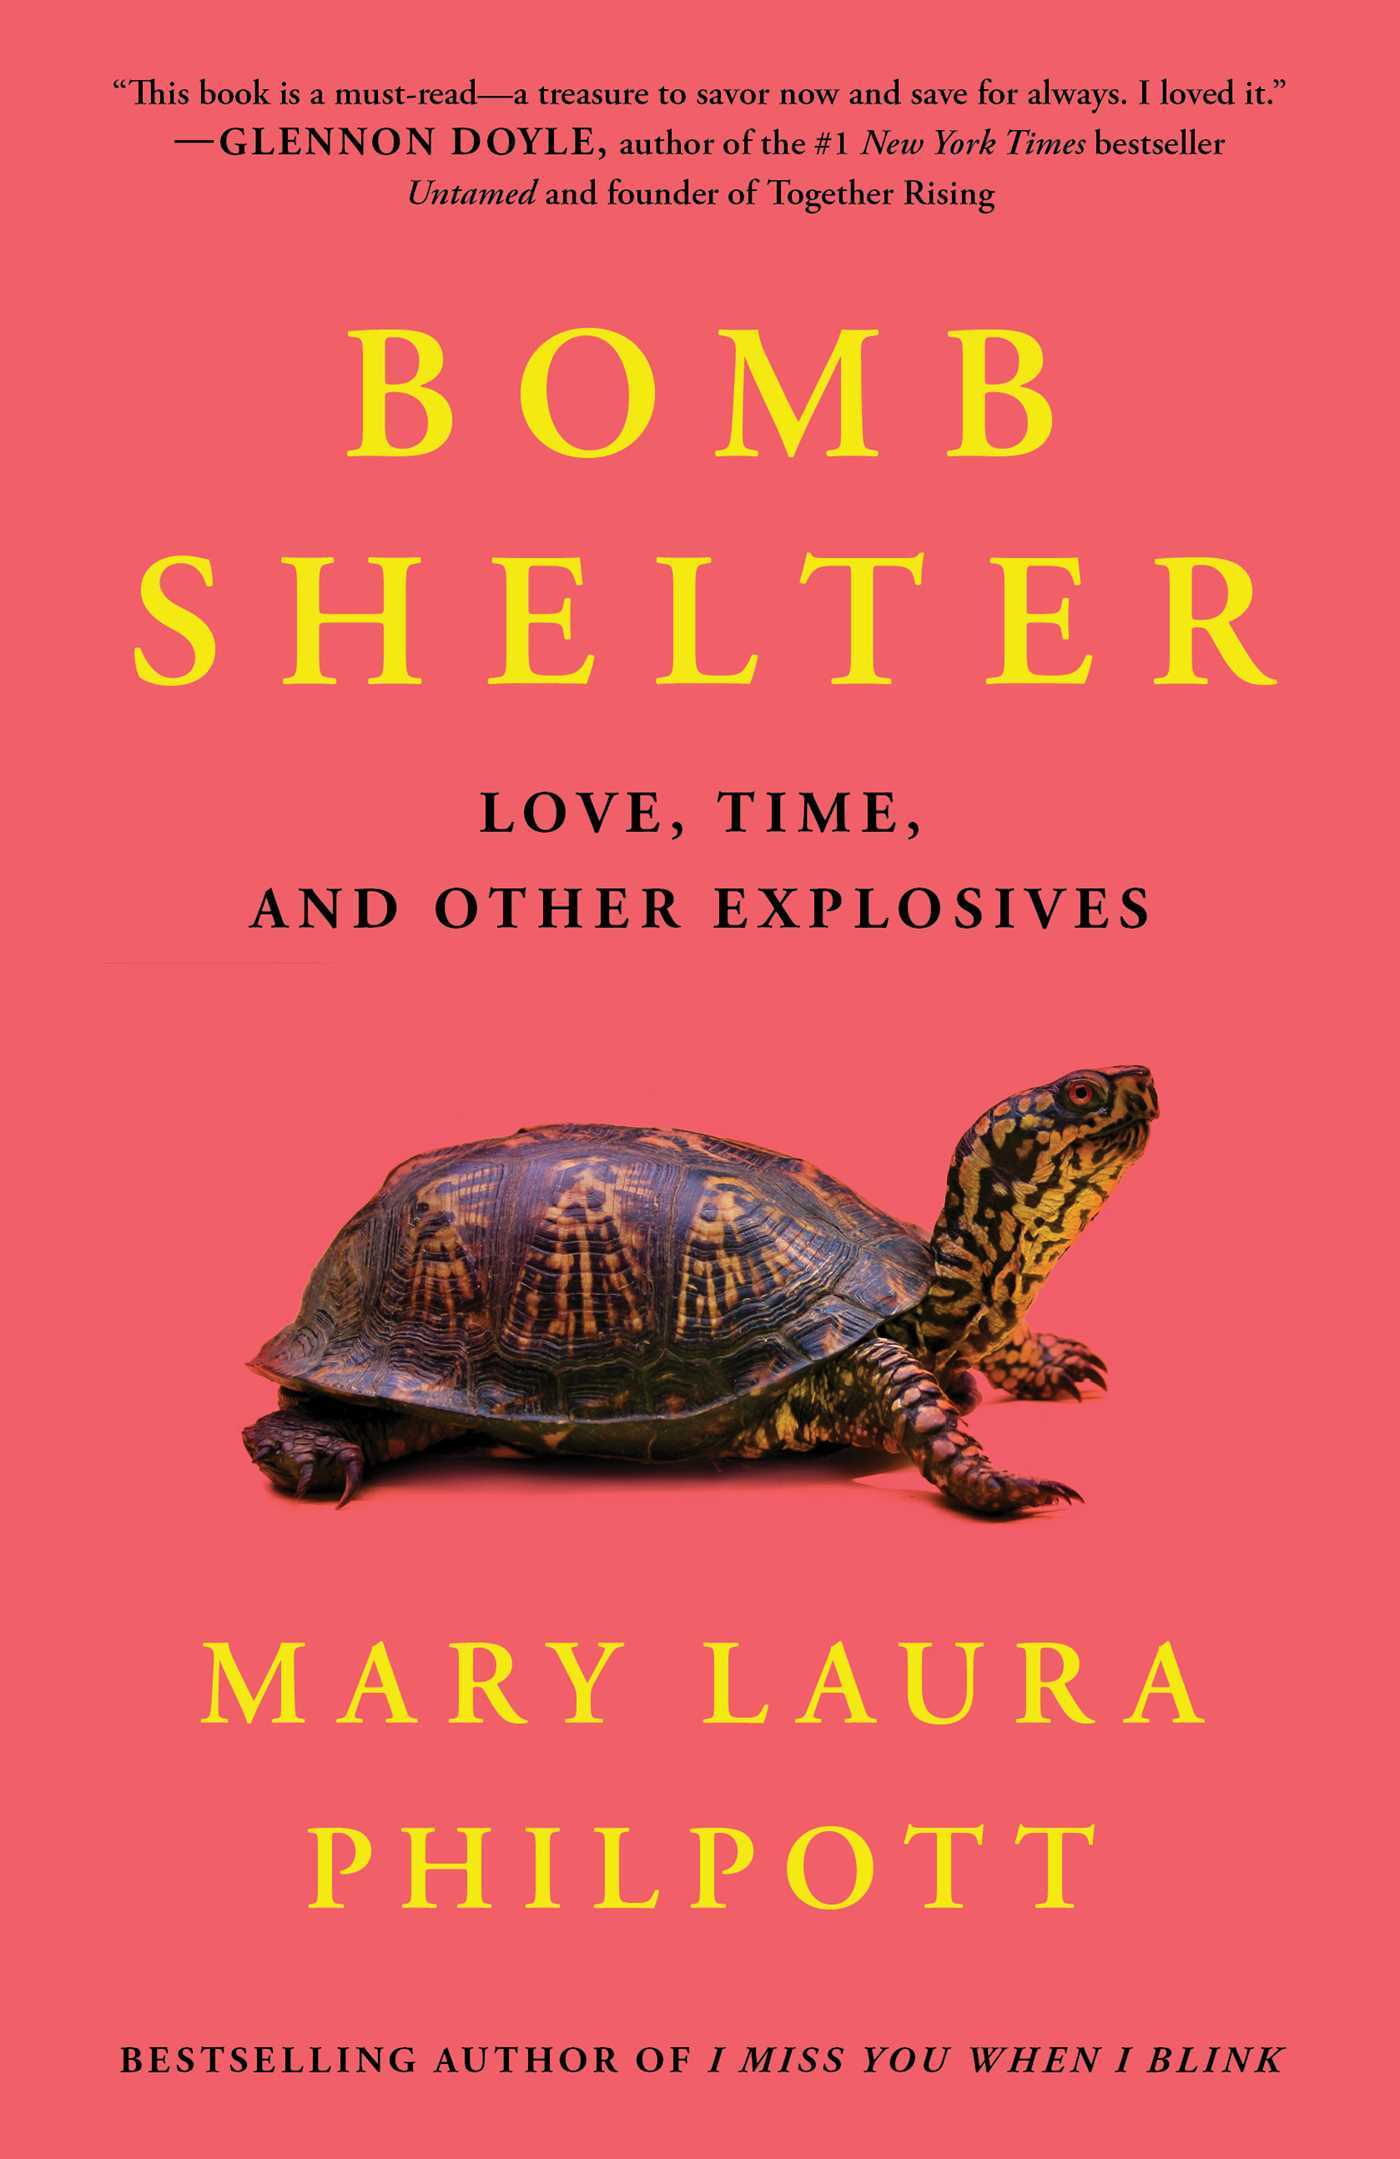 Bomb Shelter by Mary Laura Philpott Free Download